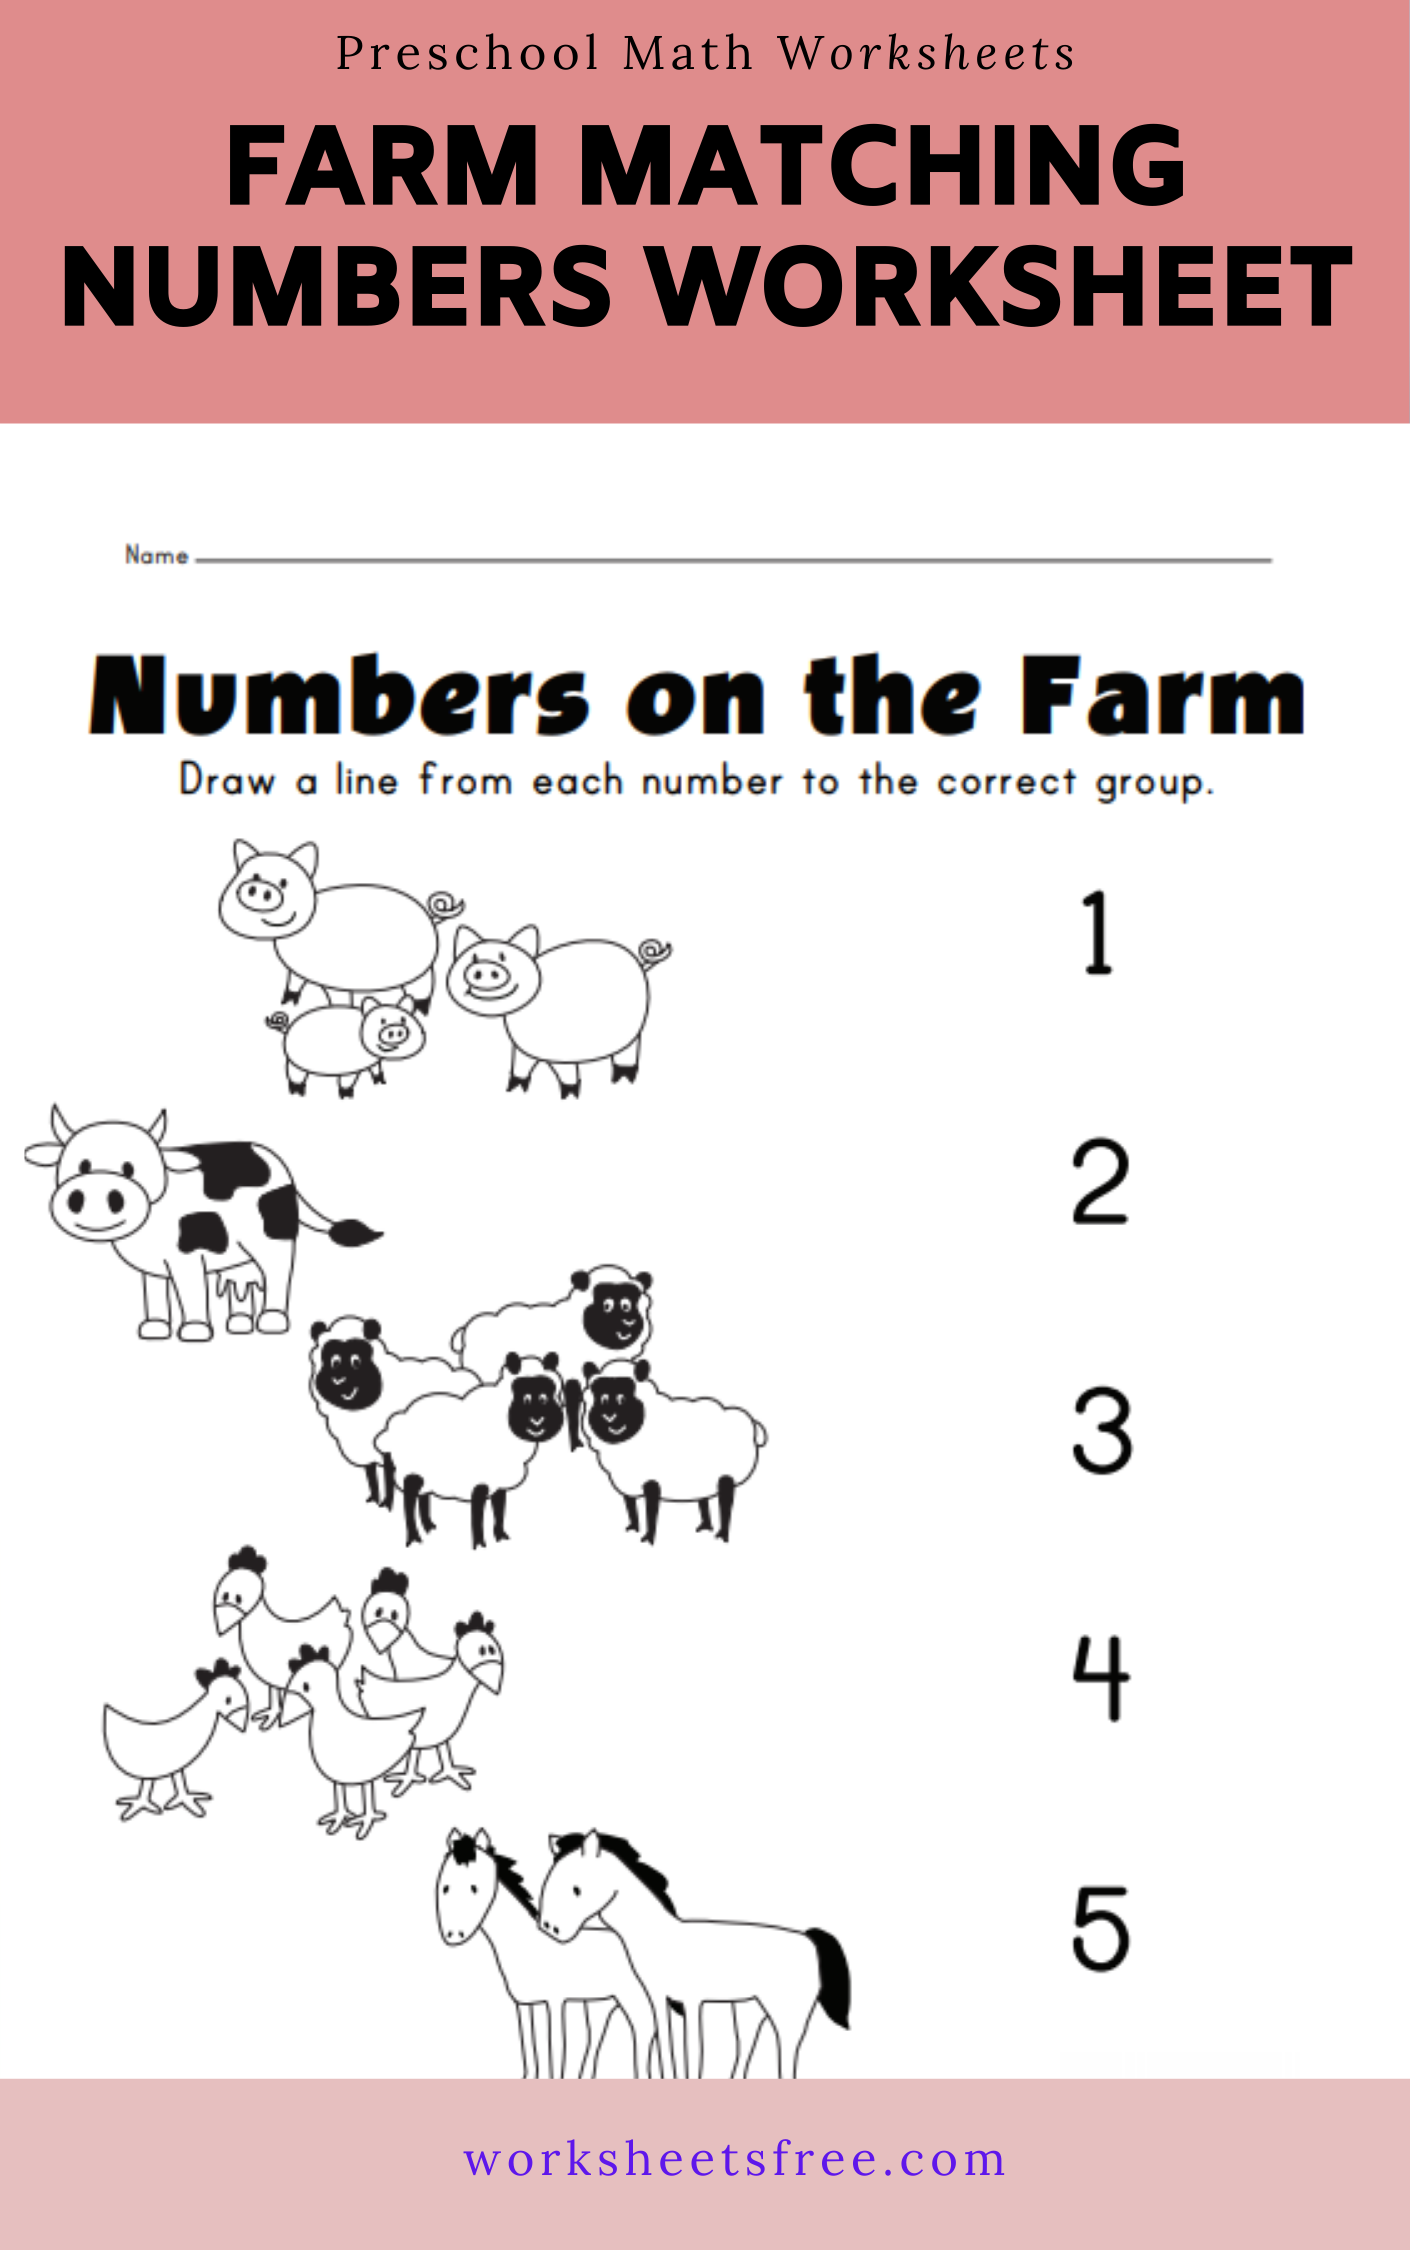 Farm worksheets for kids. Animals and numbers for Kids. Animals Worksheets Preschool. Farm animals Worksheets for Kids counting. Domestic animals Tracing Worksheets for Kids.